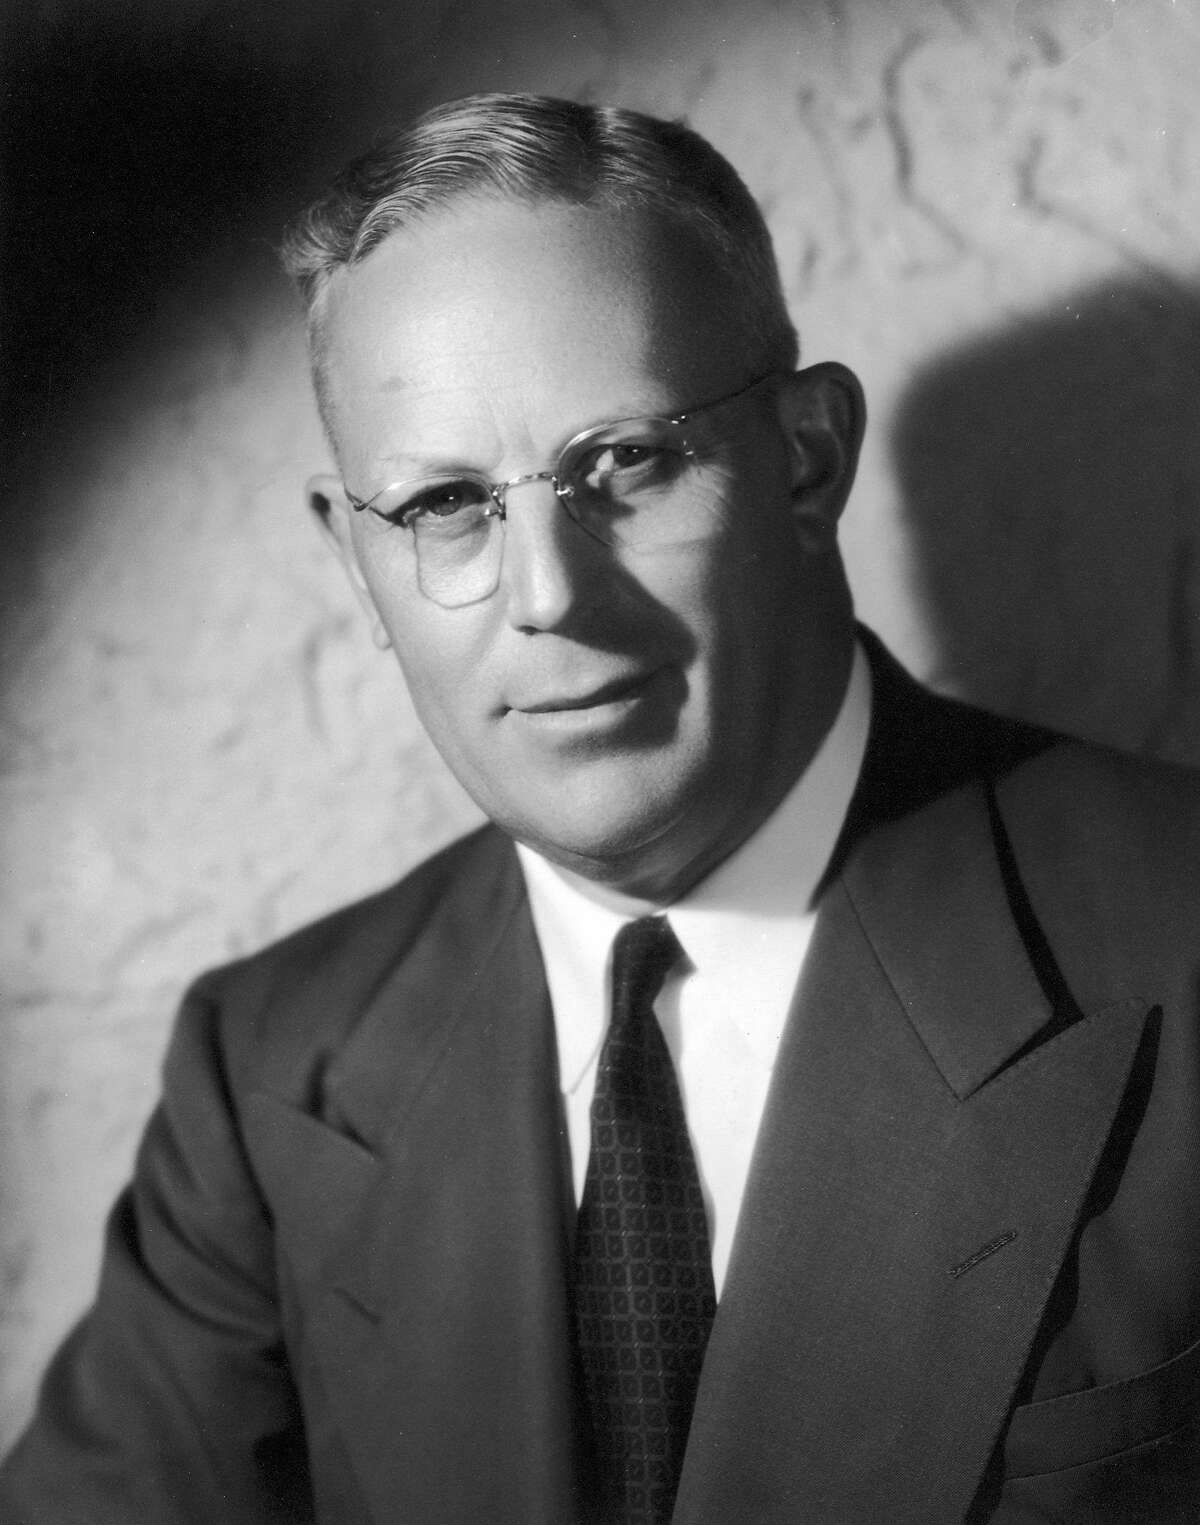 circa 1942: Studio portrait of American politician Earl Warren (1891 - 1974). Attorney General of California (1939 - 1943), Governor of California (1943 - 1953) and Fourteenth Chief Justice of the US Supreme Court (1953 - 1969). (Photo by Hulton Archive/Getty Images)